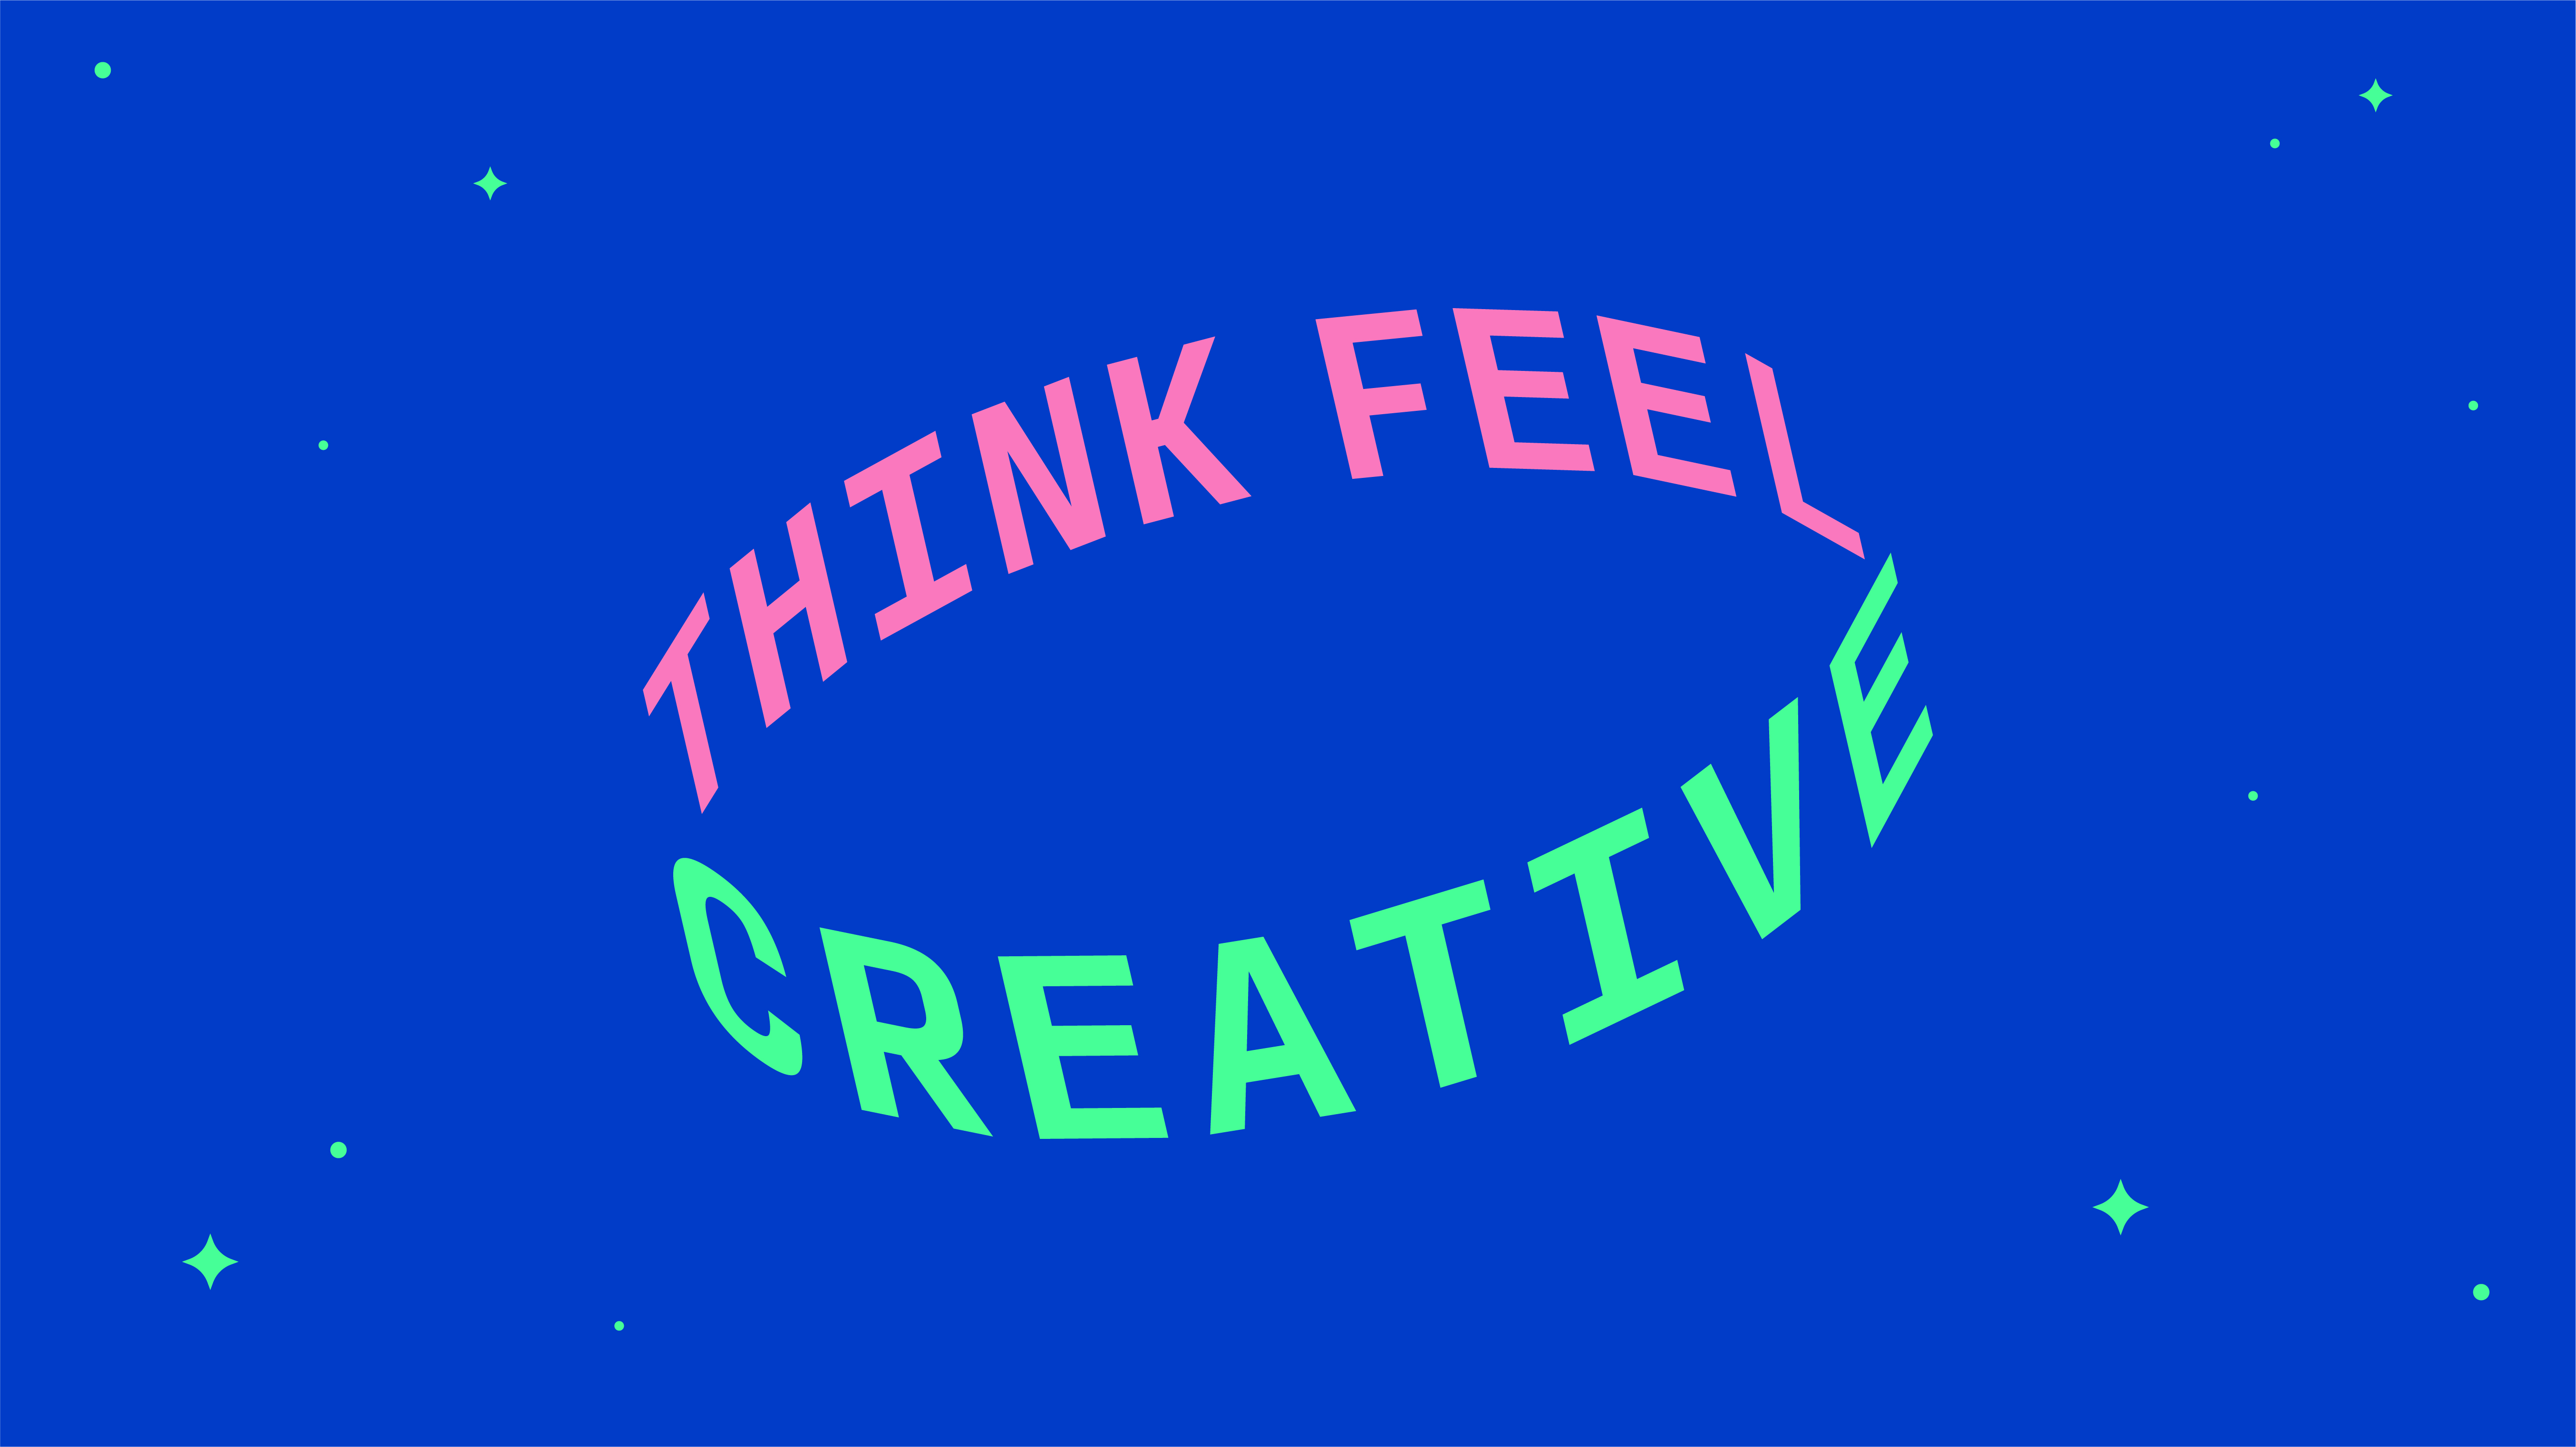 Kingdom & Sparrow Supporting Mental Health for Creatives with Think Feel Creative Campaign